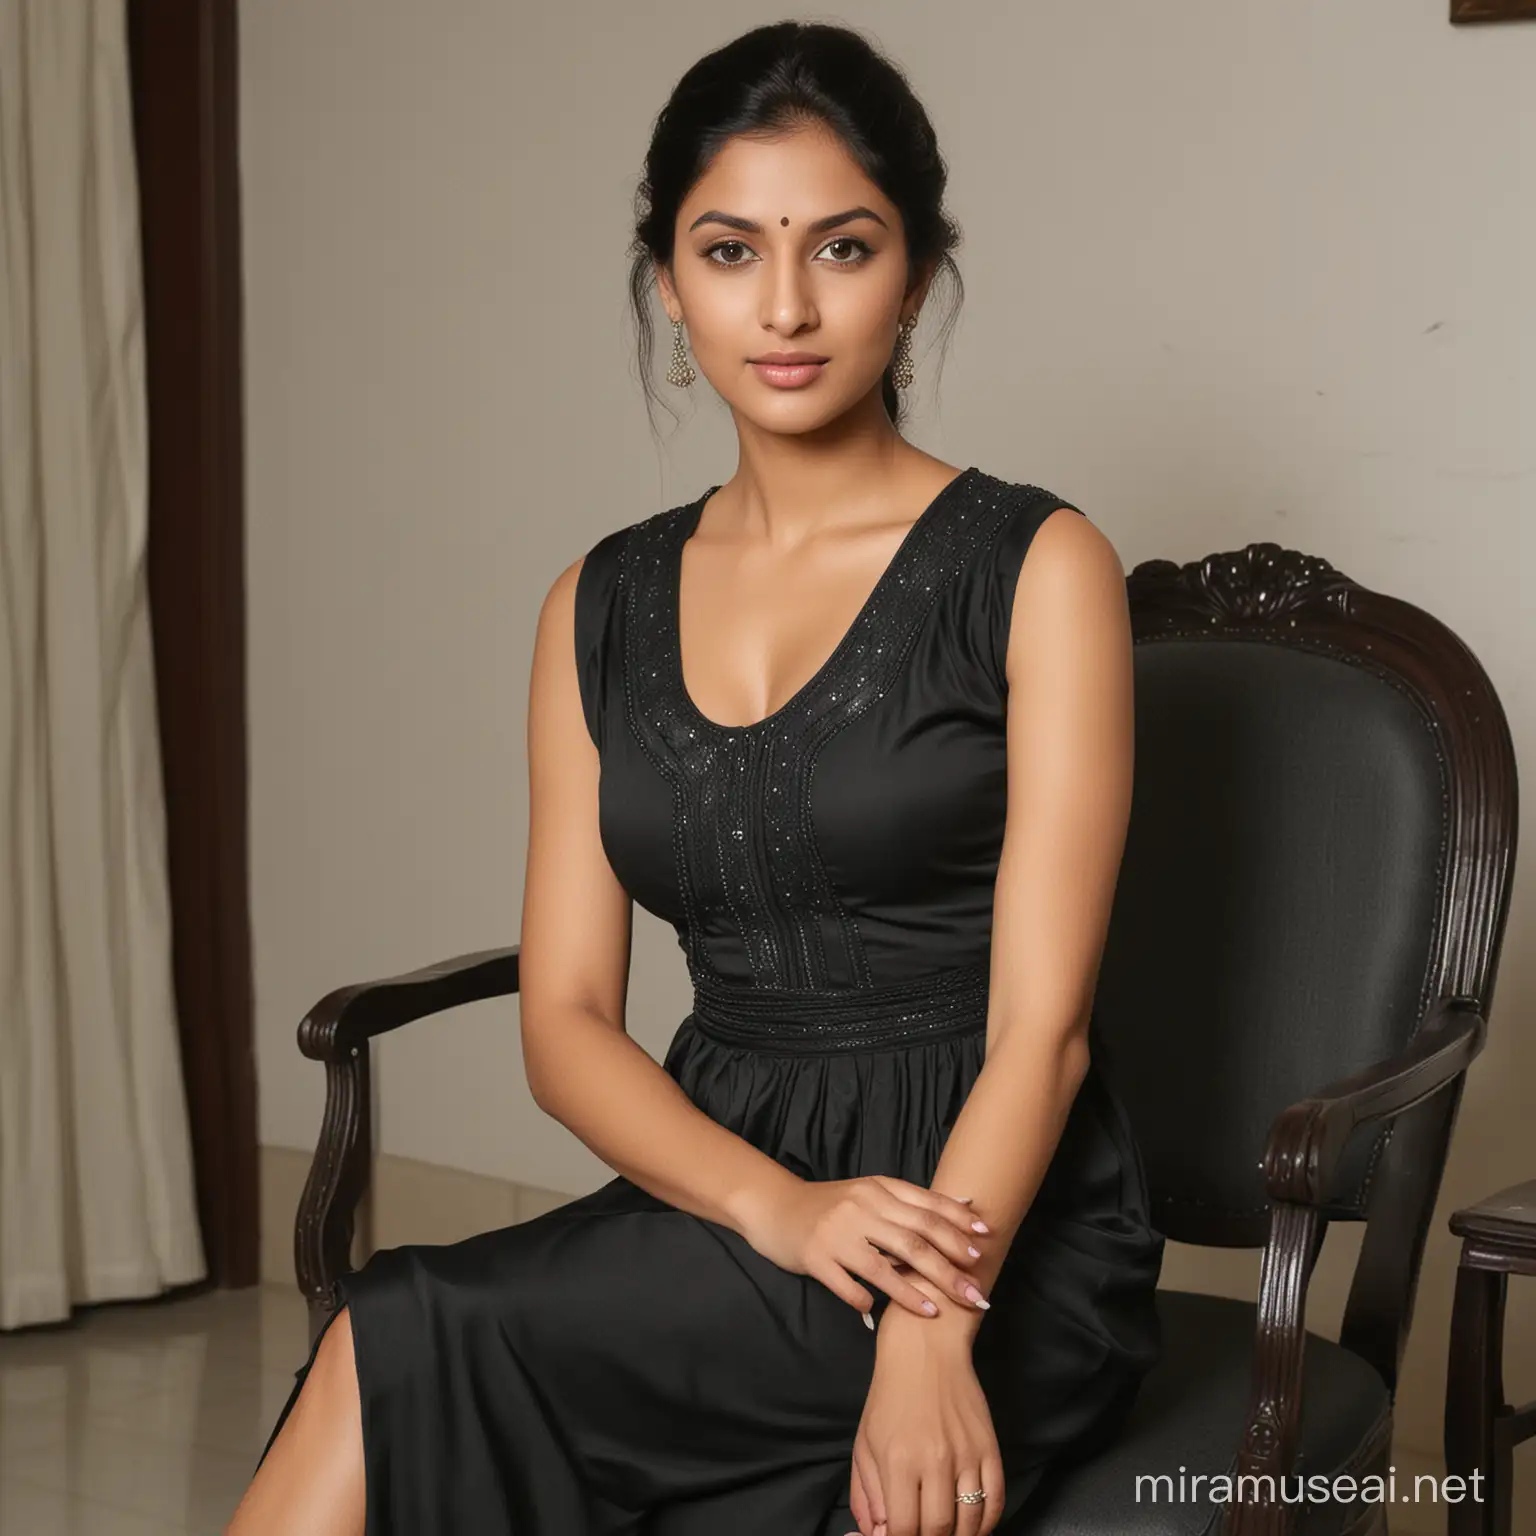 Elegant Indian Woman in Black Dress Seated in a Stylish Room